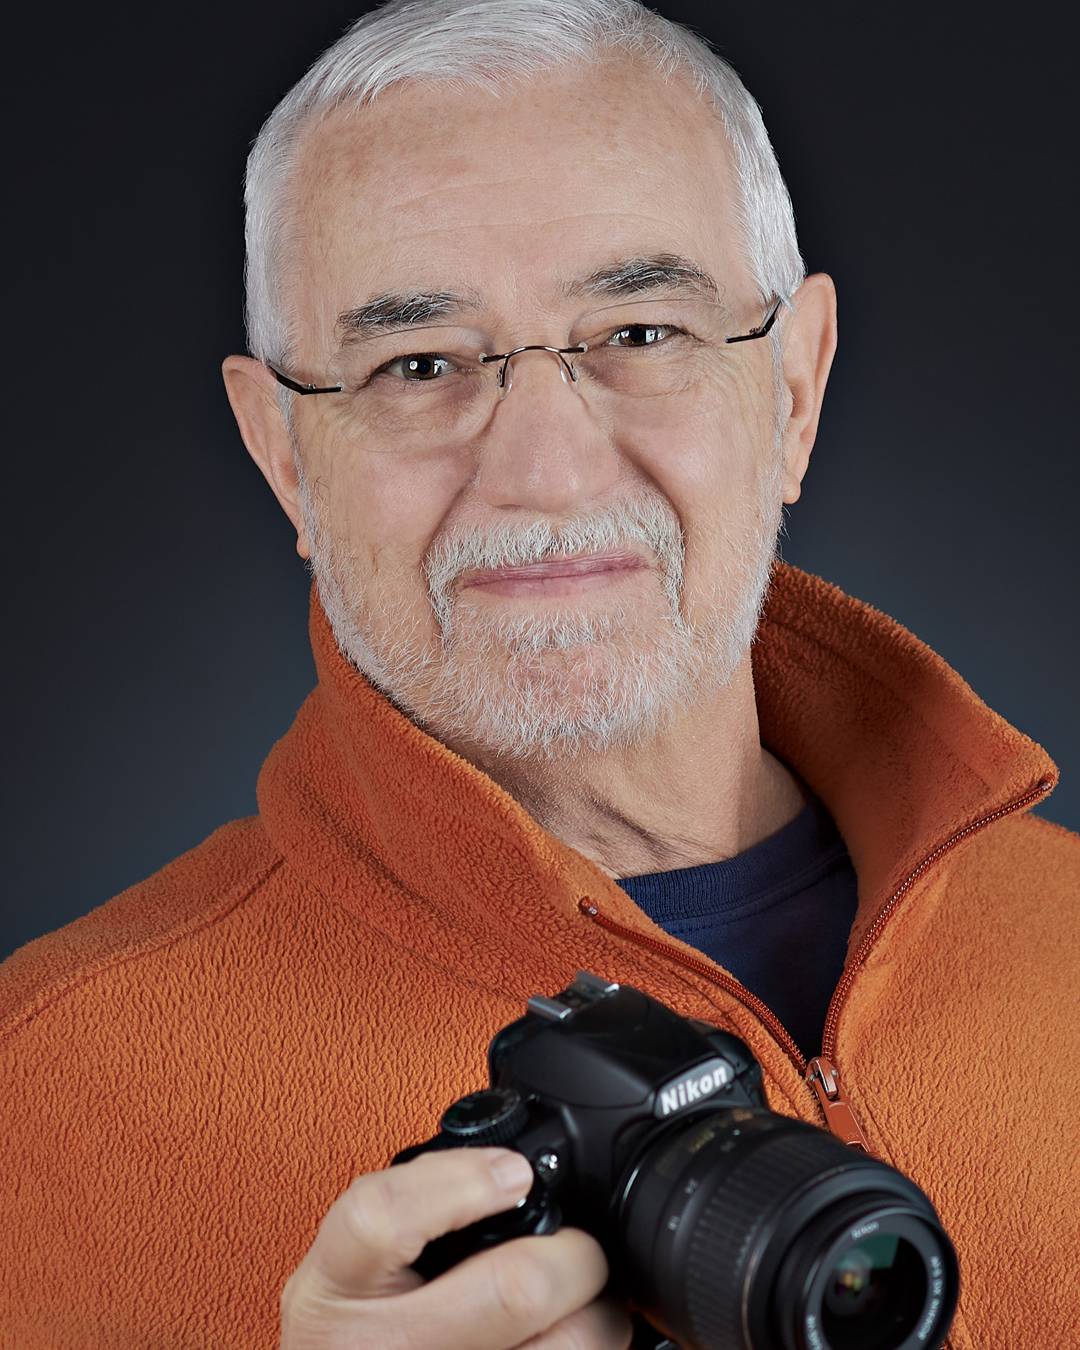 Doug Mullis, owner and Managing Director of Mullis Photography Group and Proclicks School & Sports Photography.